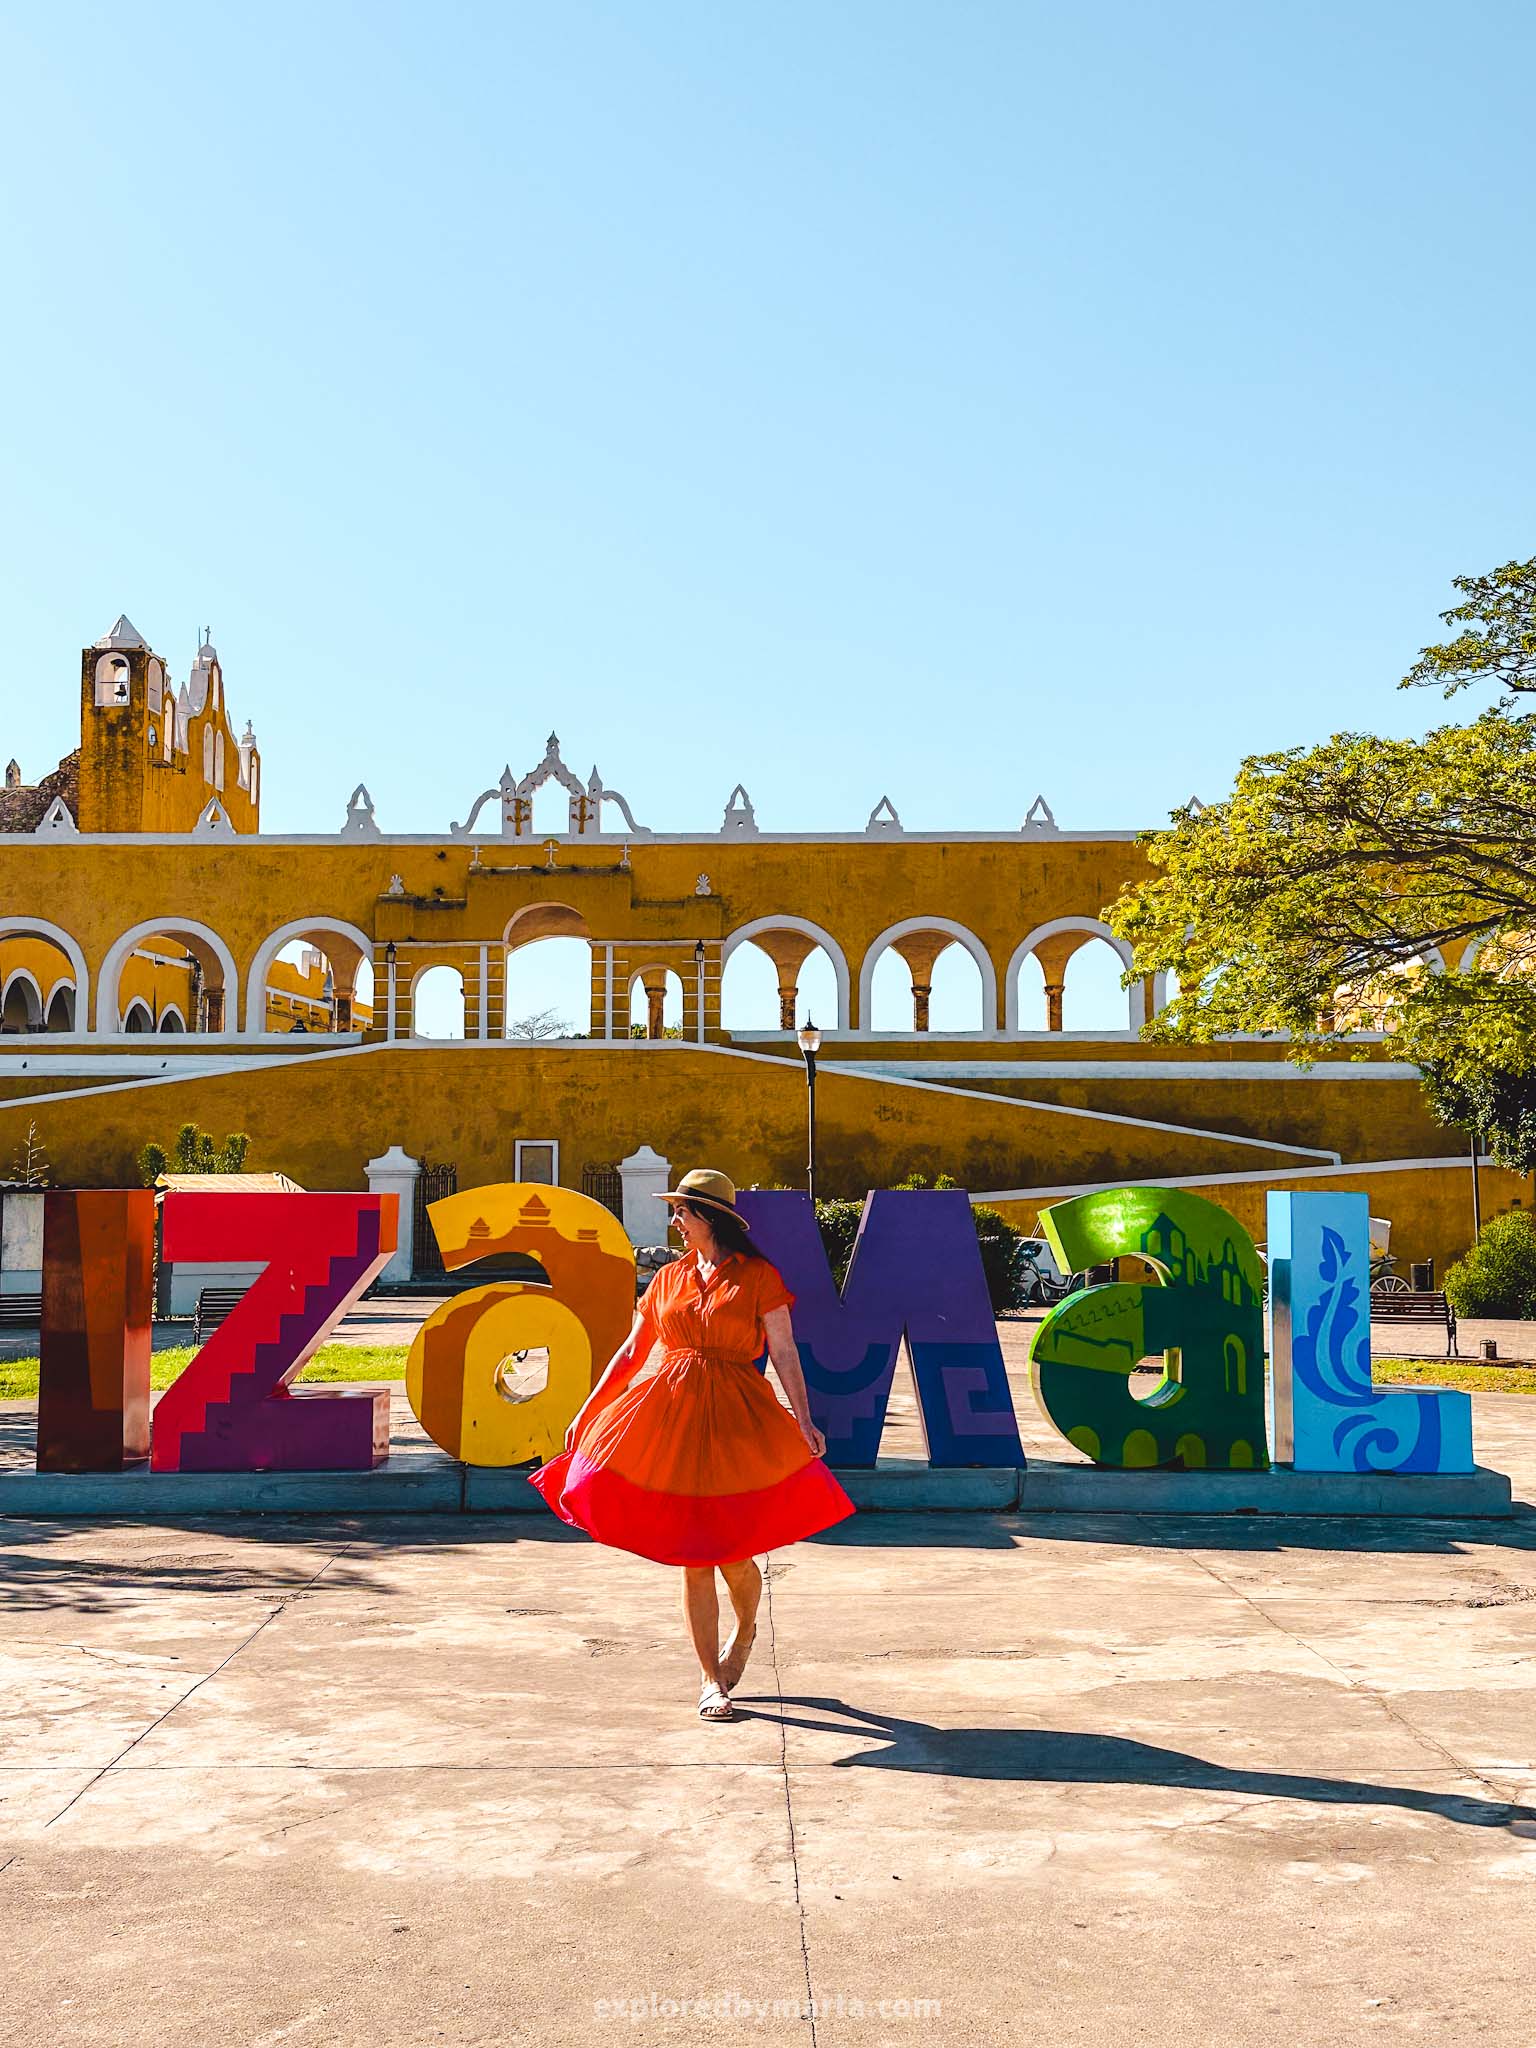 Izamal, Mexico-one of the things to do in Izamal is take a photo at the colorful IZAMAL sign located in the middle of Itzamina Park